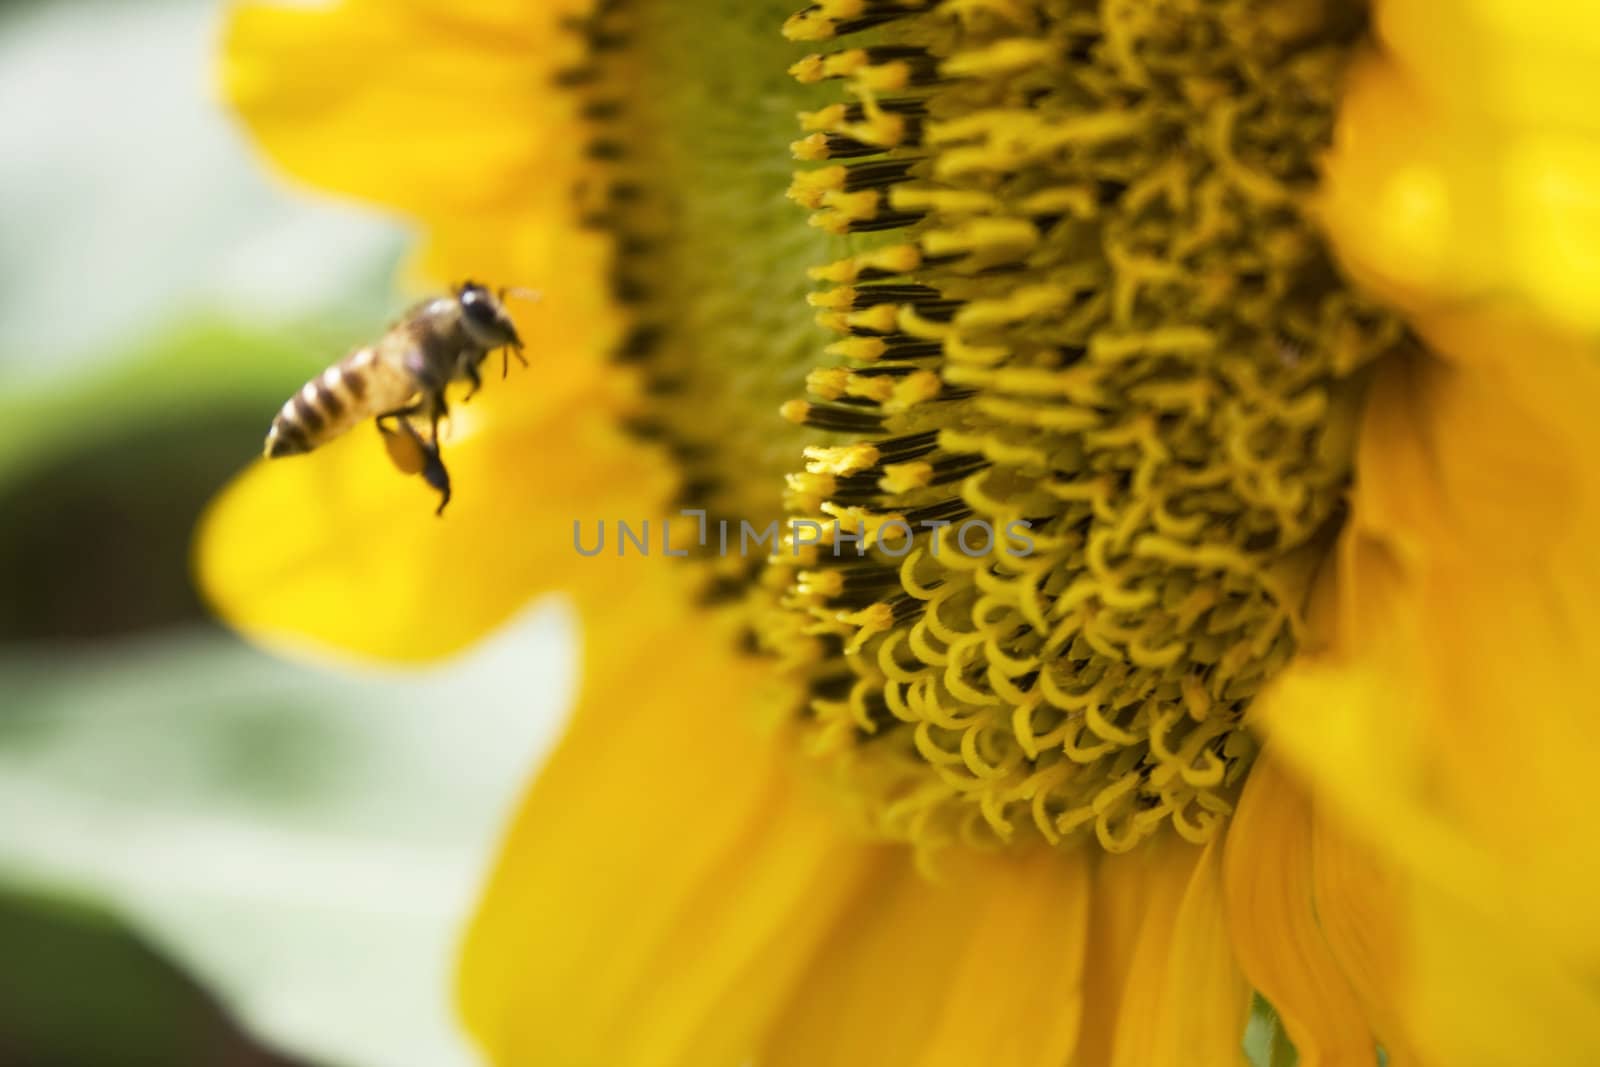 A sunflower and a bee found in a garden.